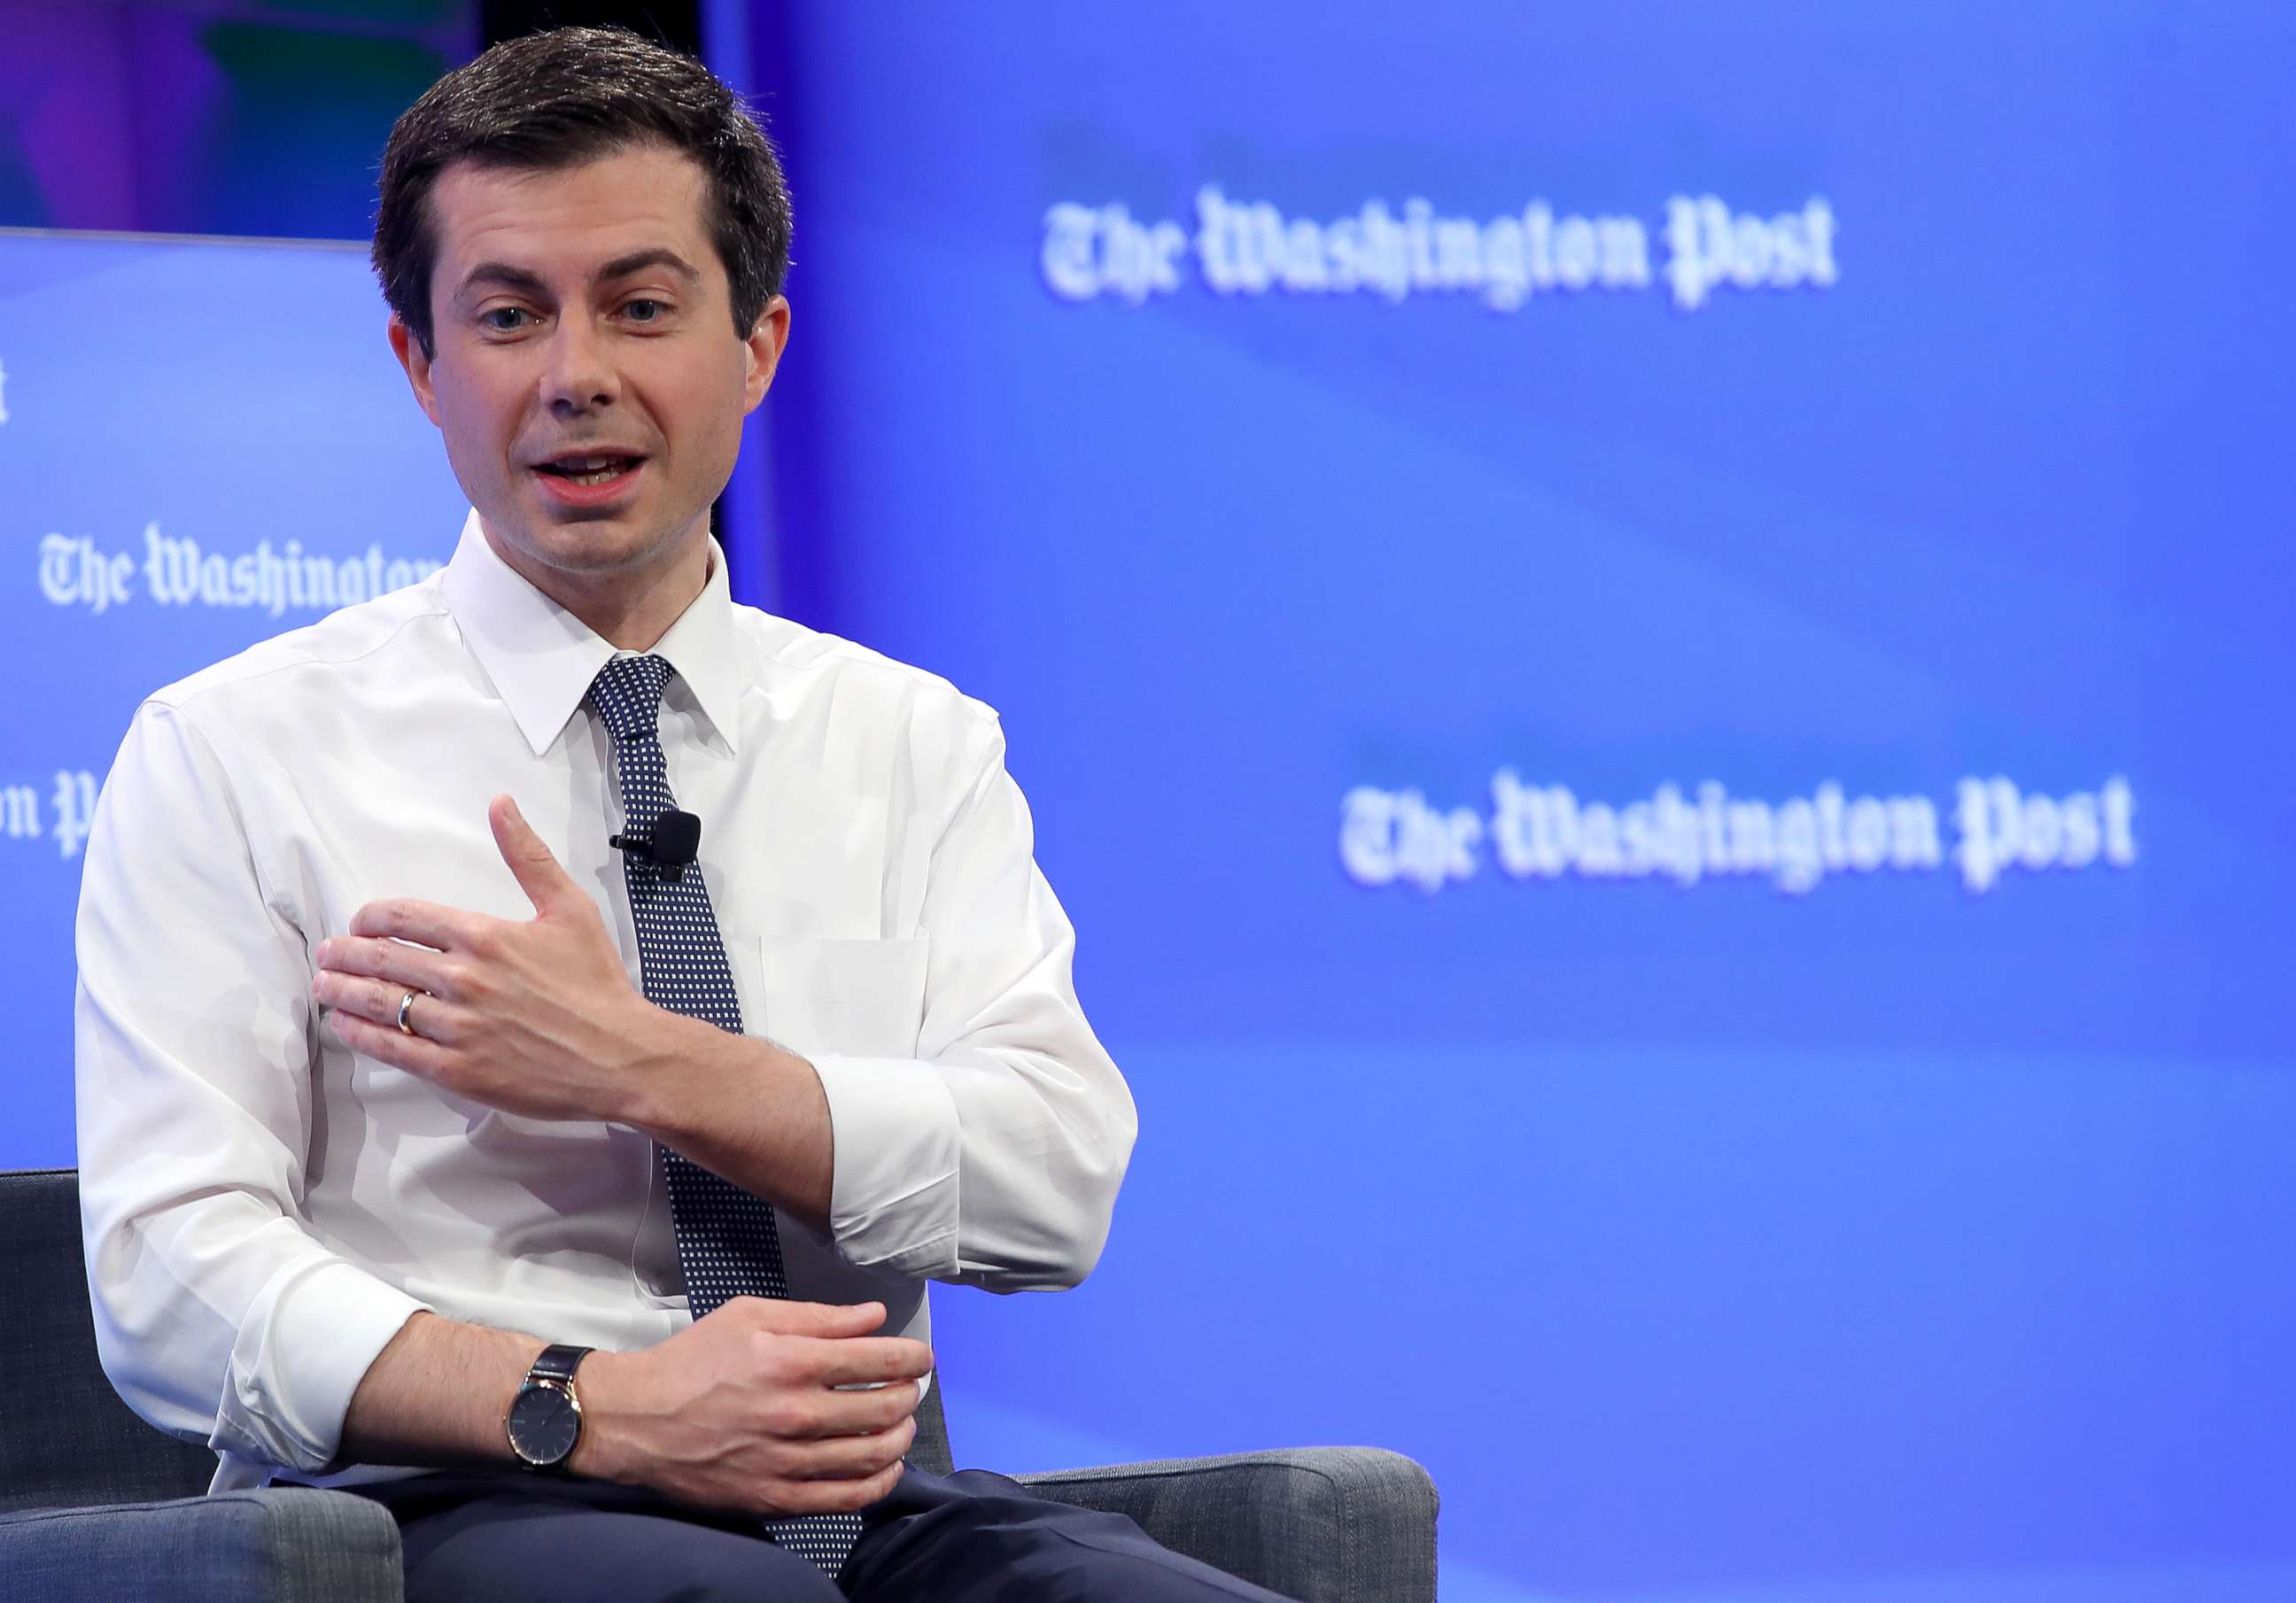 PHOTO: Democratic presidential candidate Mayor Pete Buttigieg answers questions at a Washington Post Live discussion, May 23, 2019, in Washington, DC.